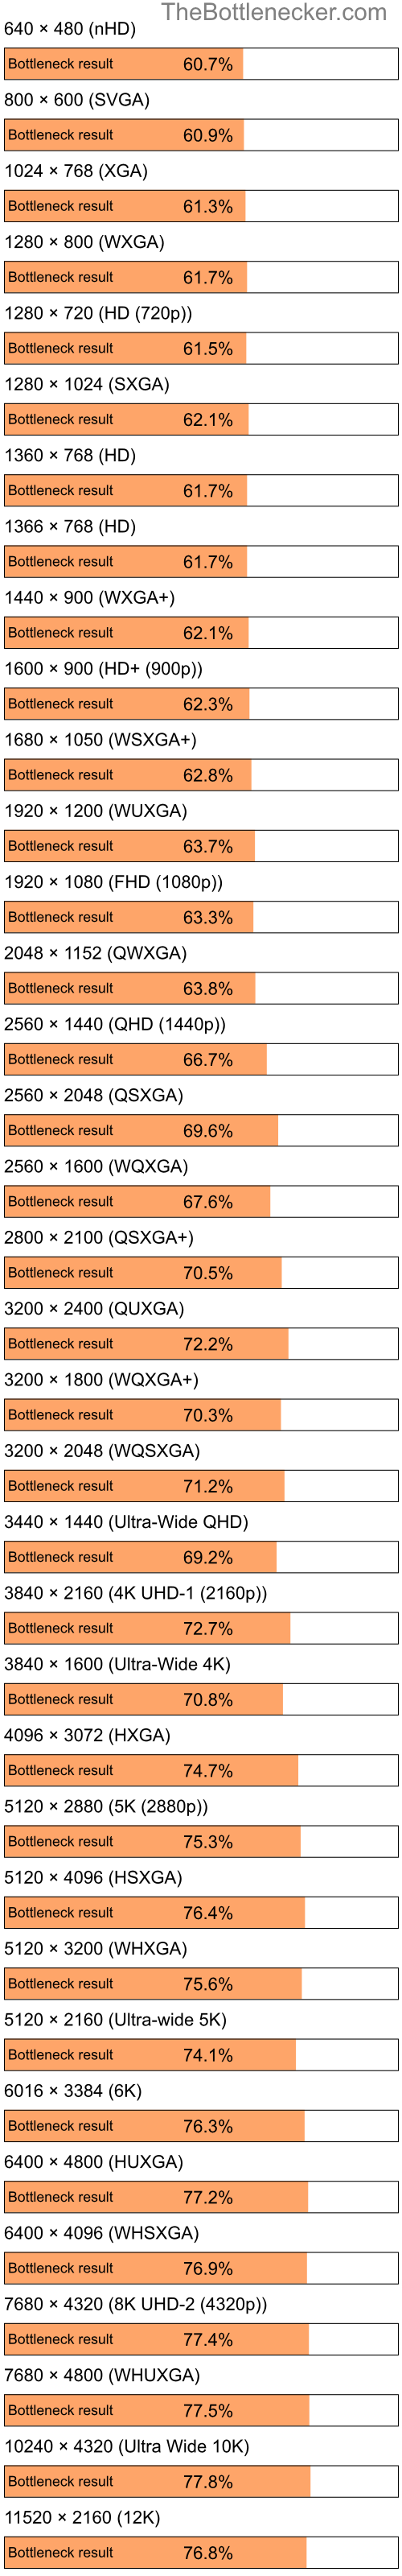 Bottleneck results by resolution for Intel Pentium 4 and AMD Radeon HD 7290 in7 Days to Die